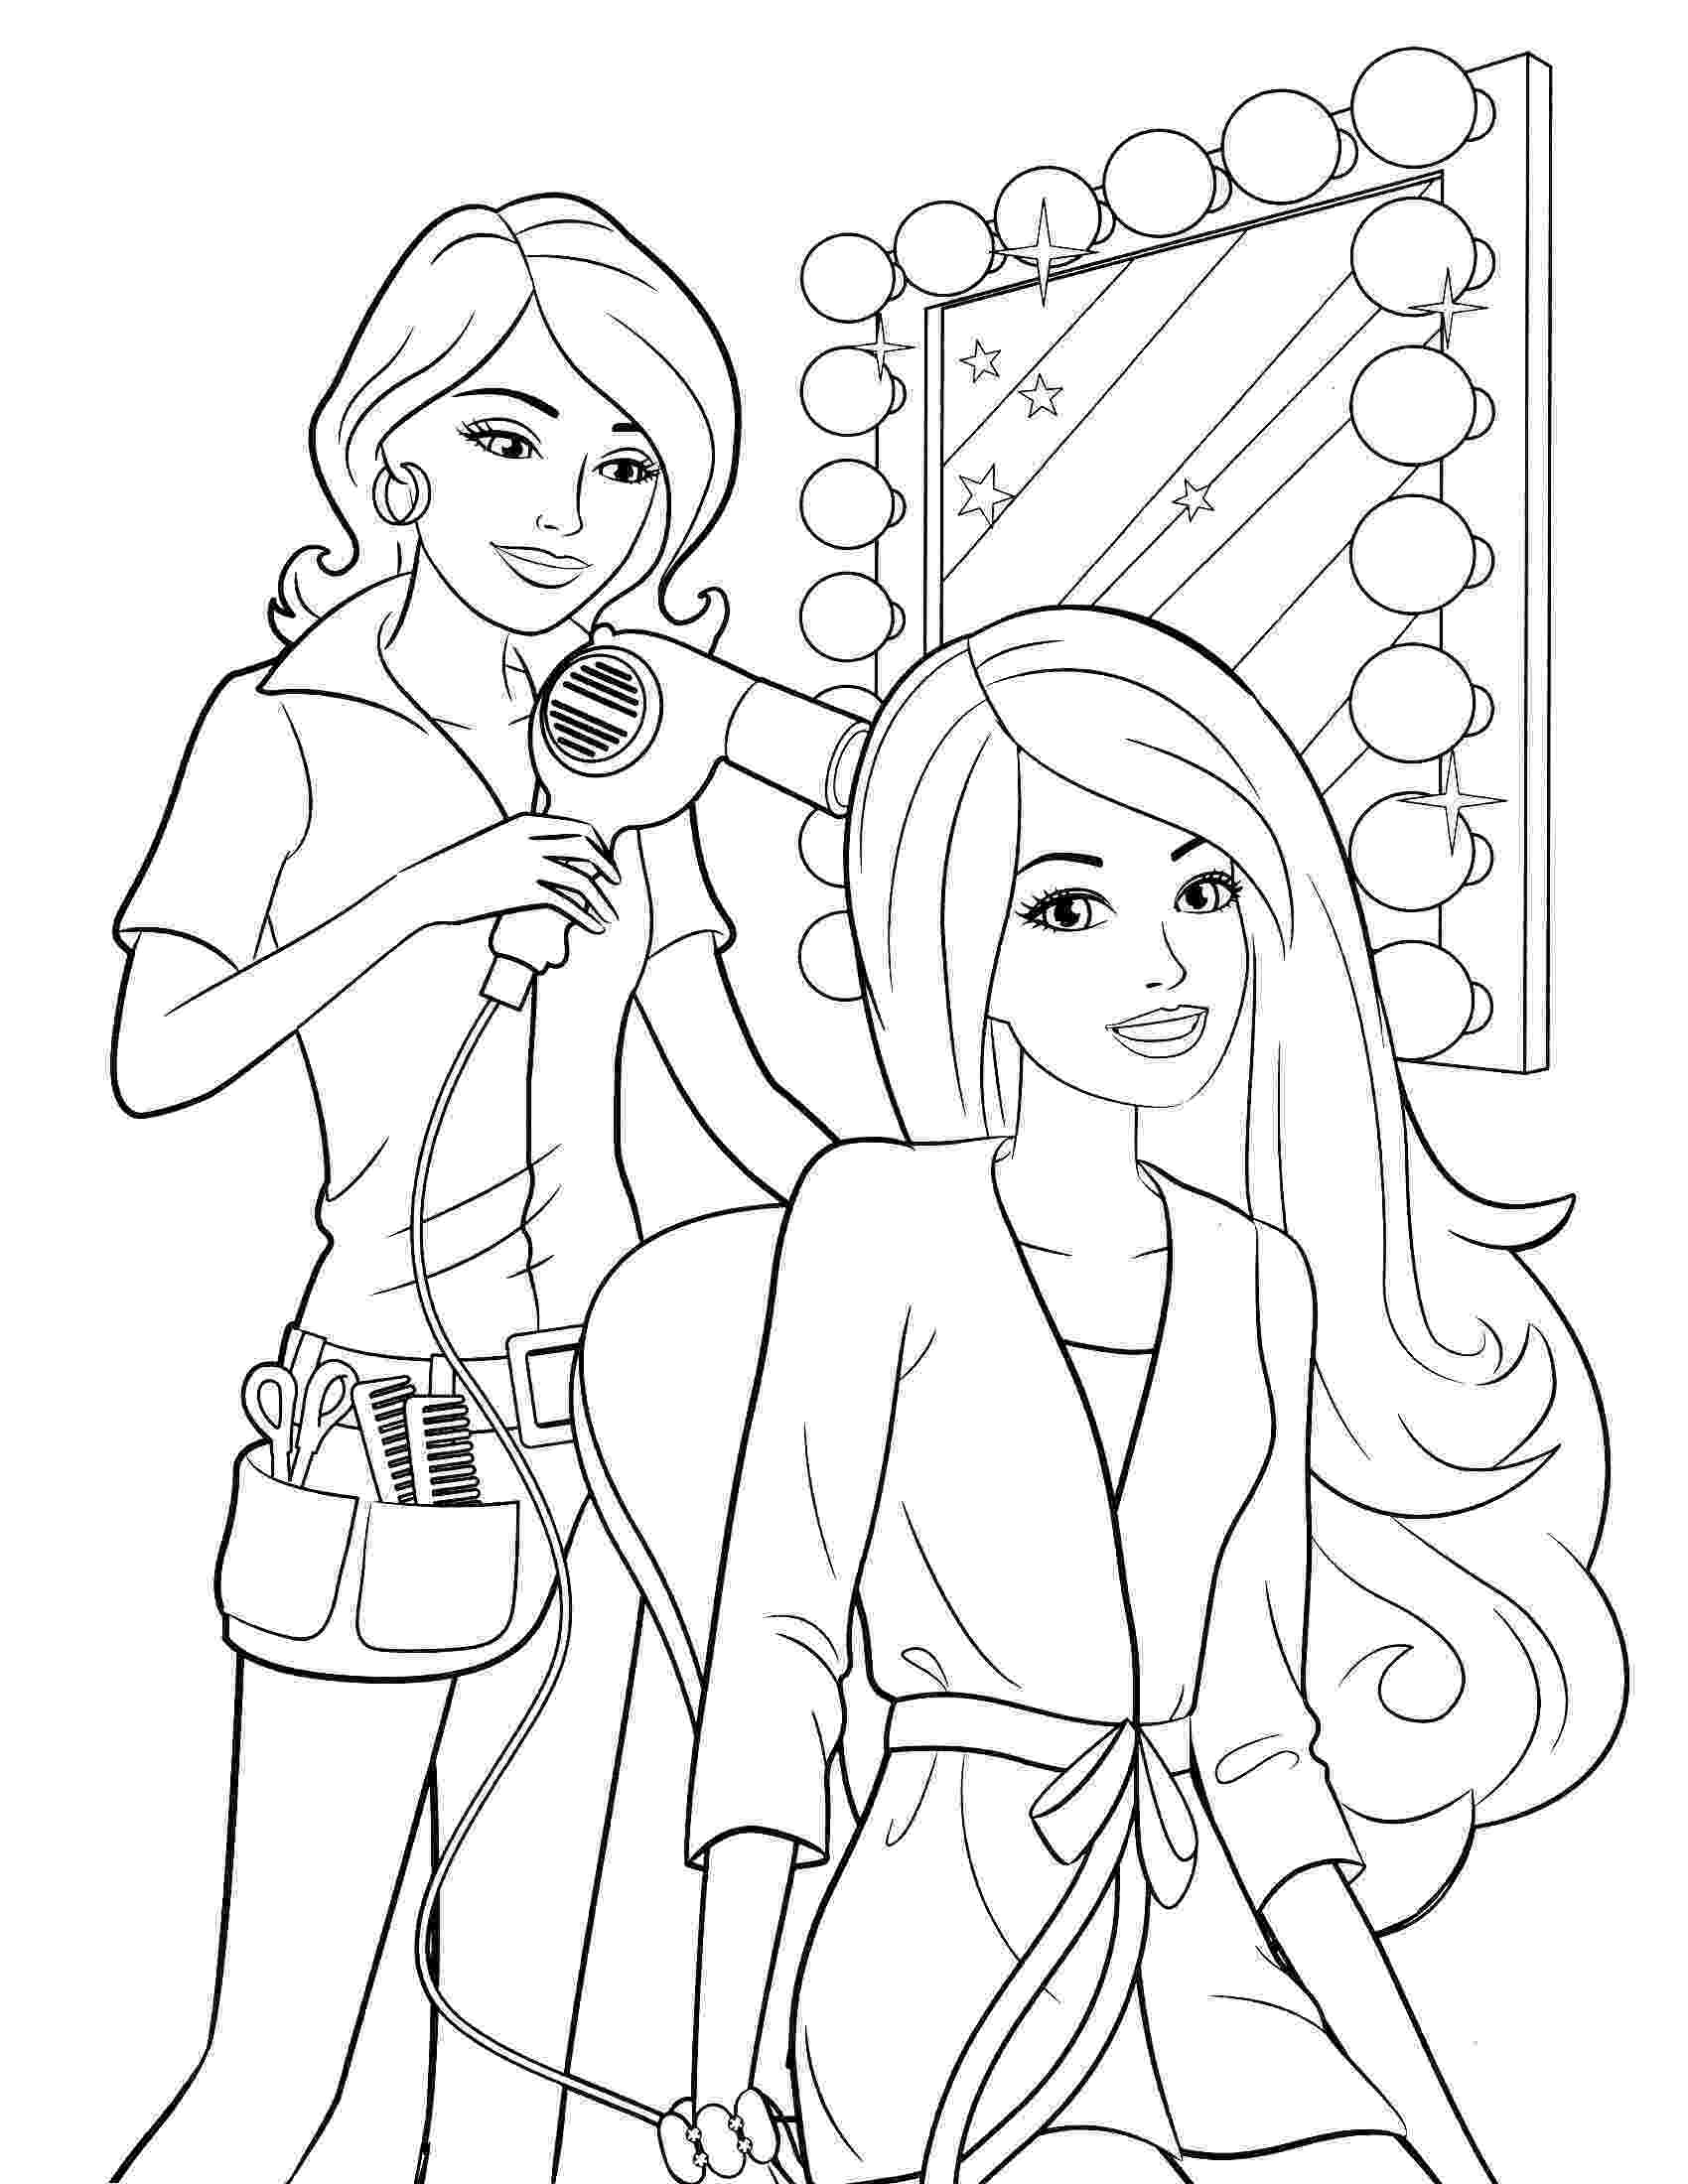 pictures for girls to colour coloring pages for girls best coloring pages for kids colour pictures to girls for 